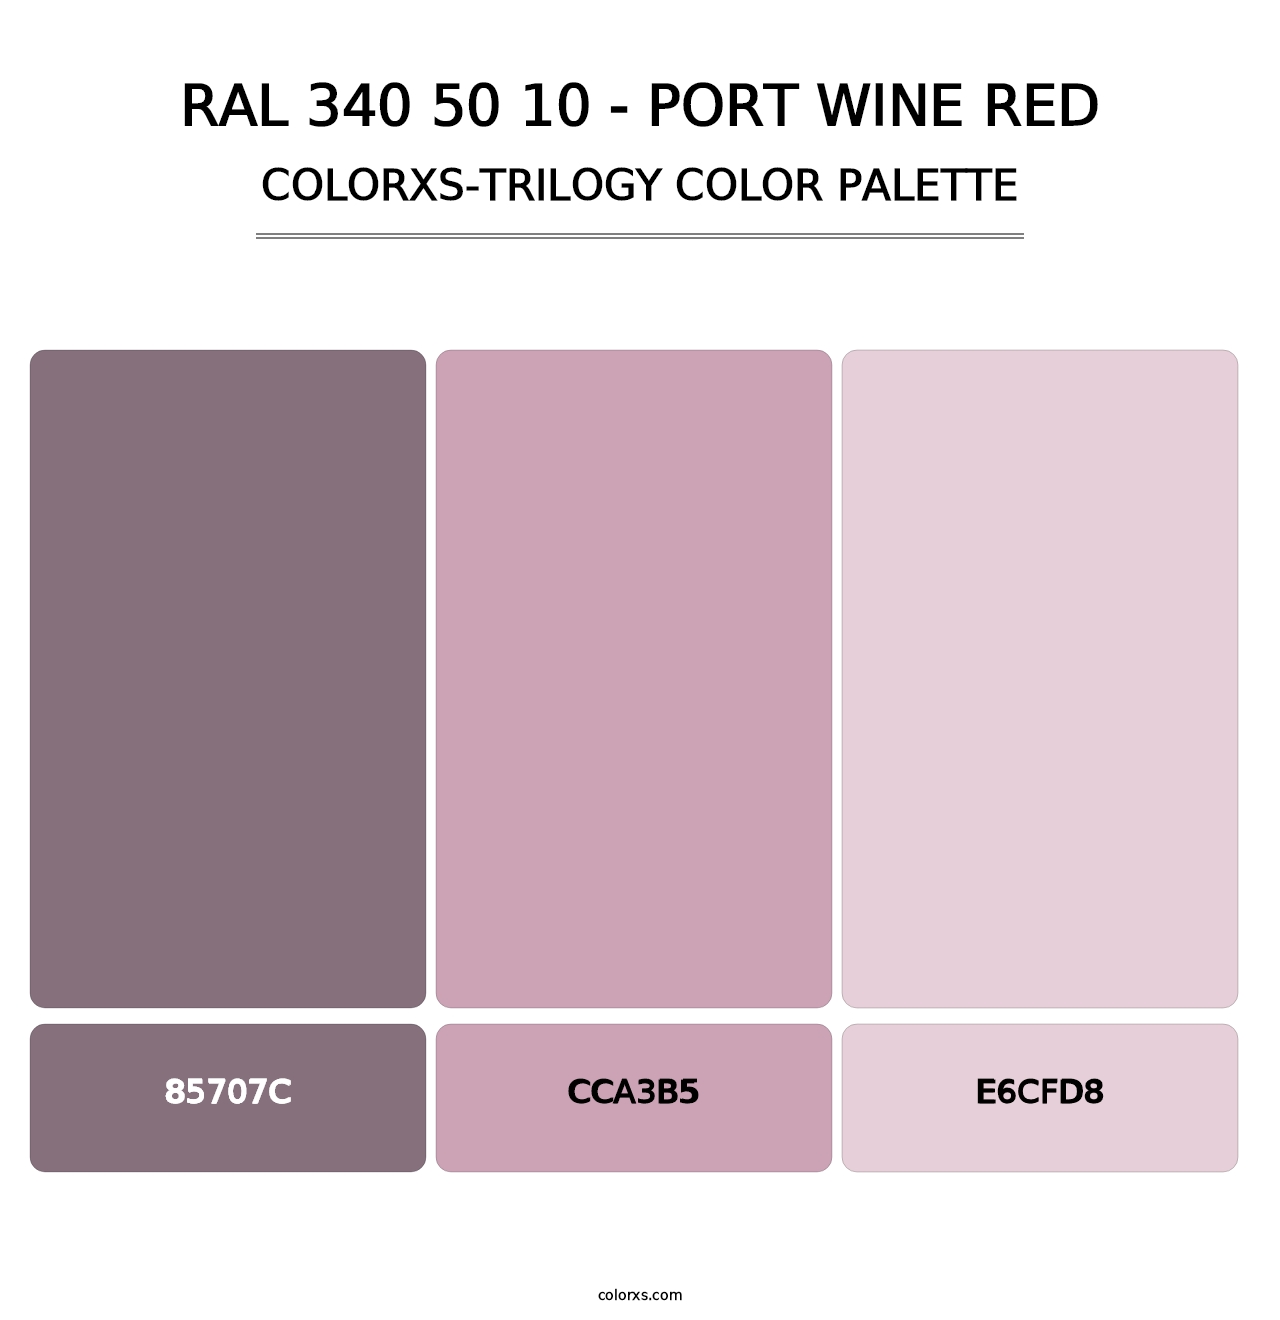 RAL 340 50 10 - Port Wine Red - Colorxs Trilogy Palette